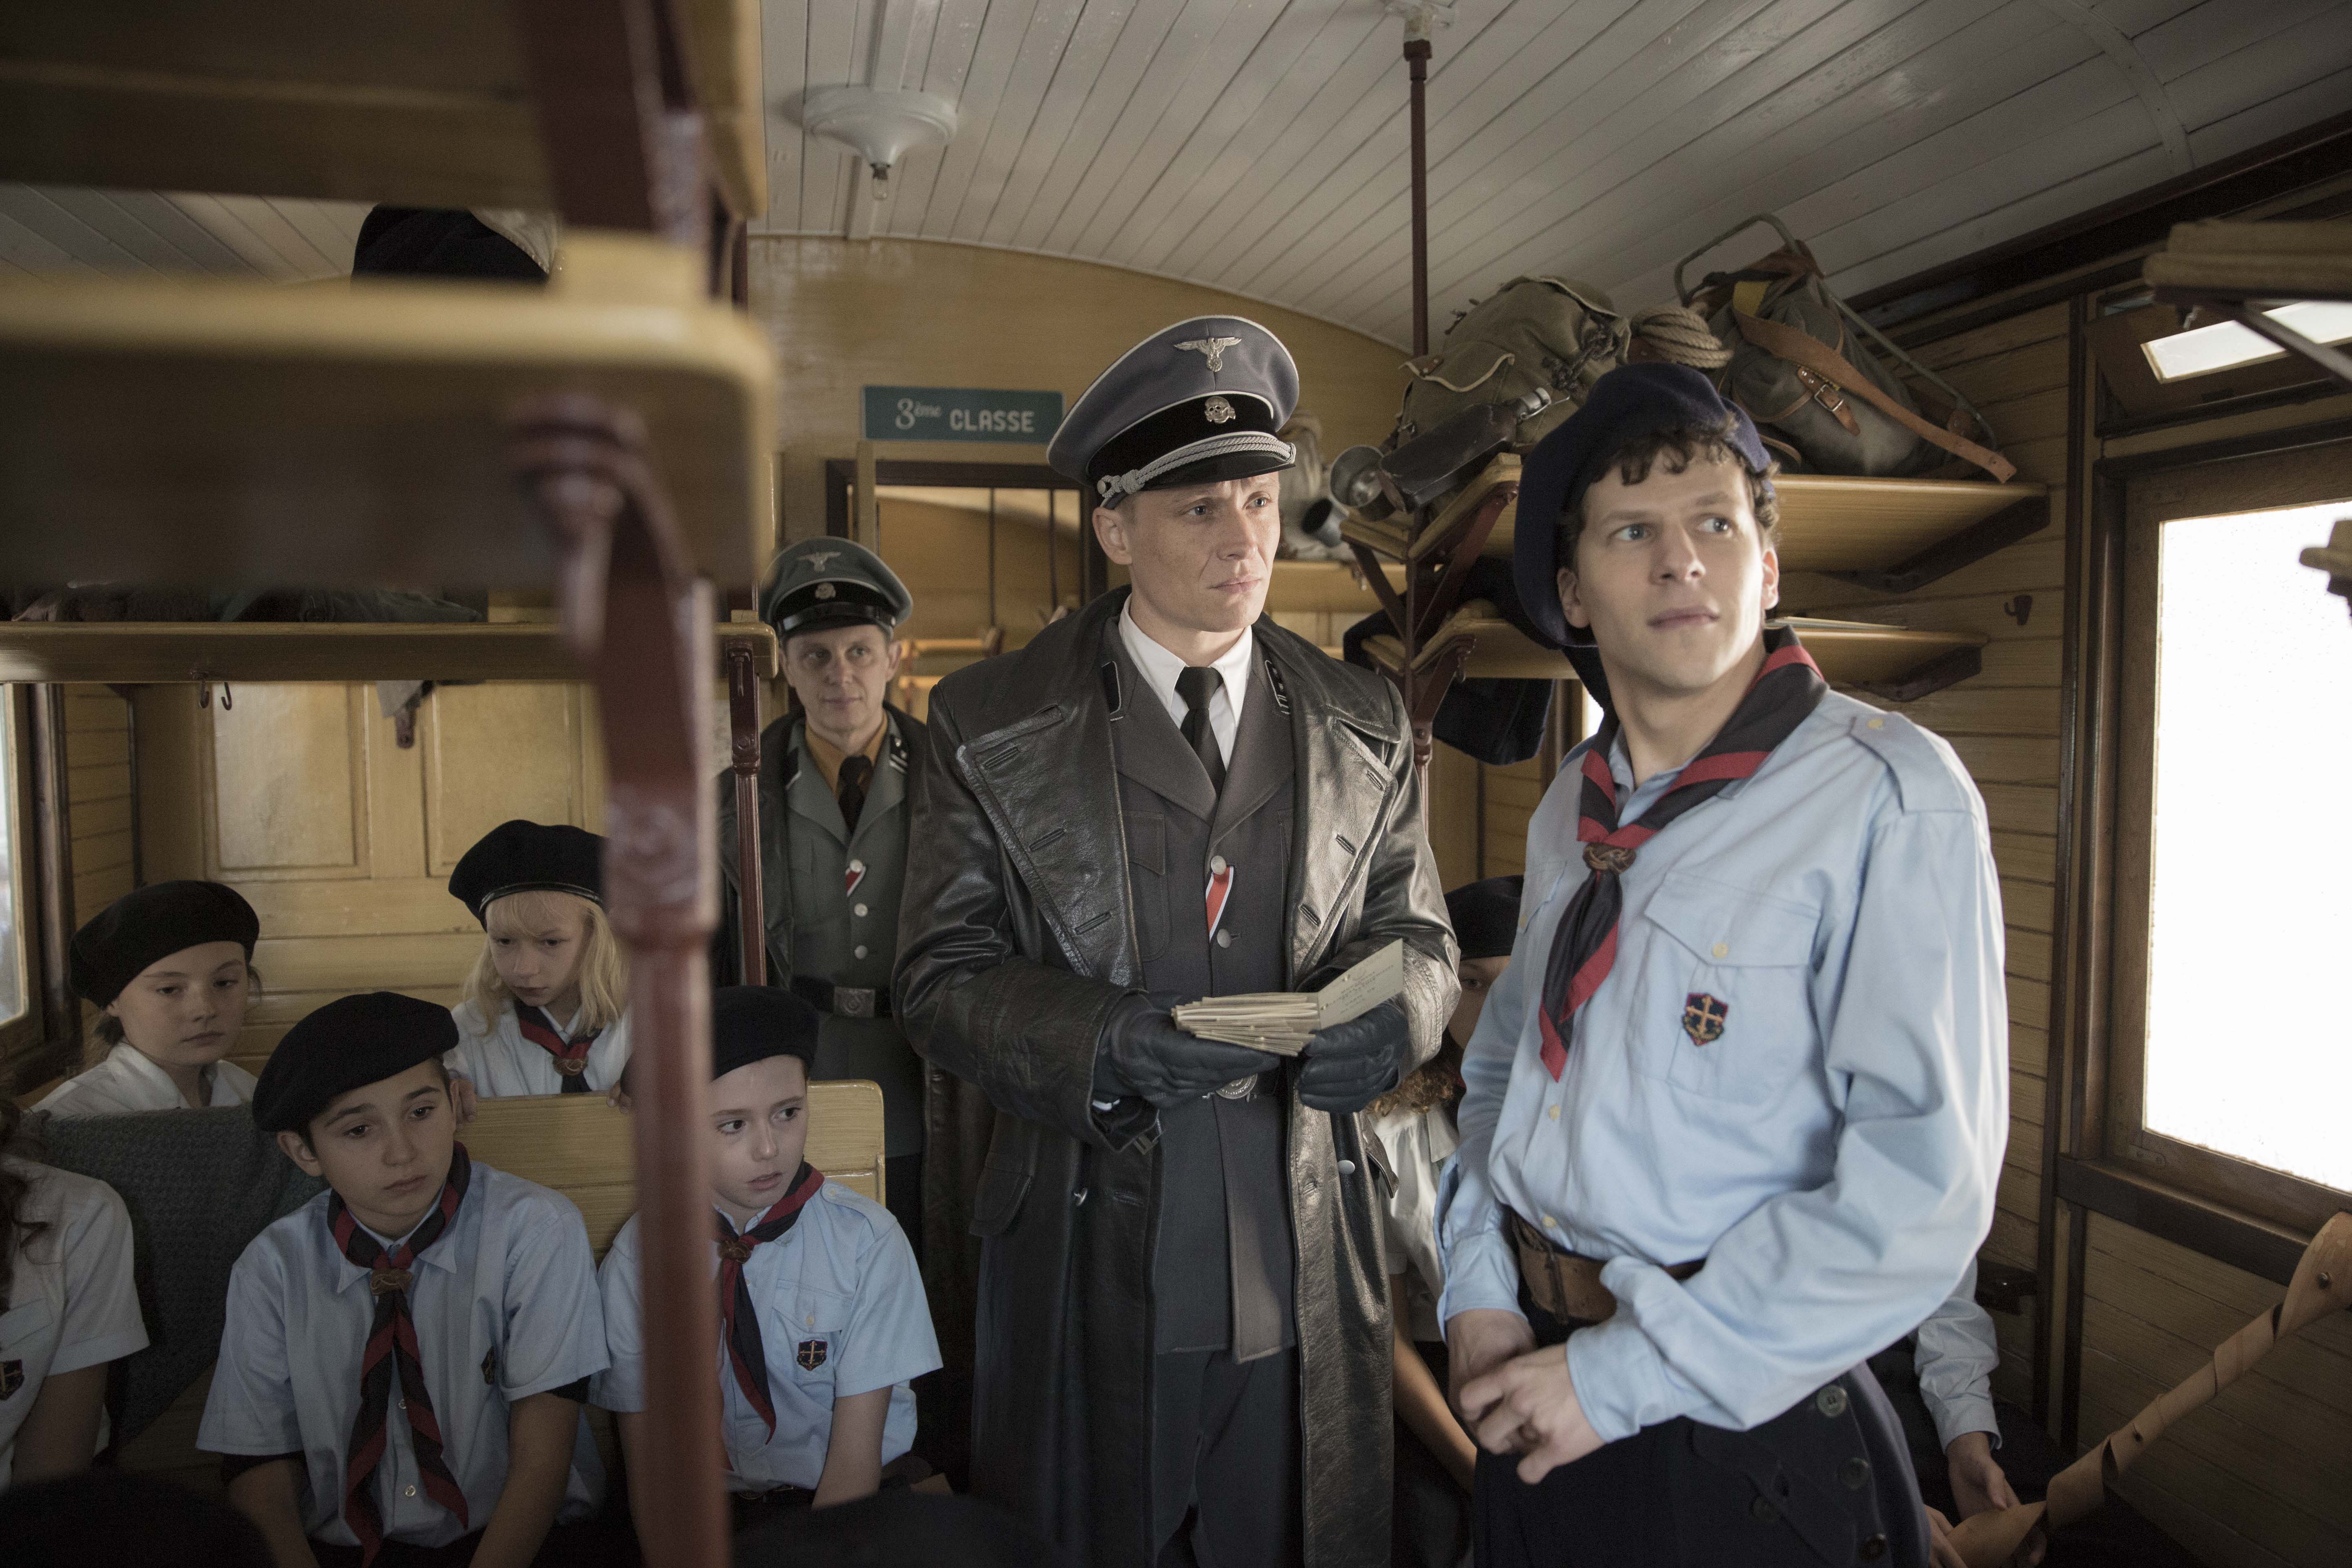 A film about the French Resistance opens in Portugal on 24 February